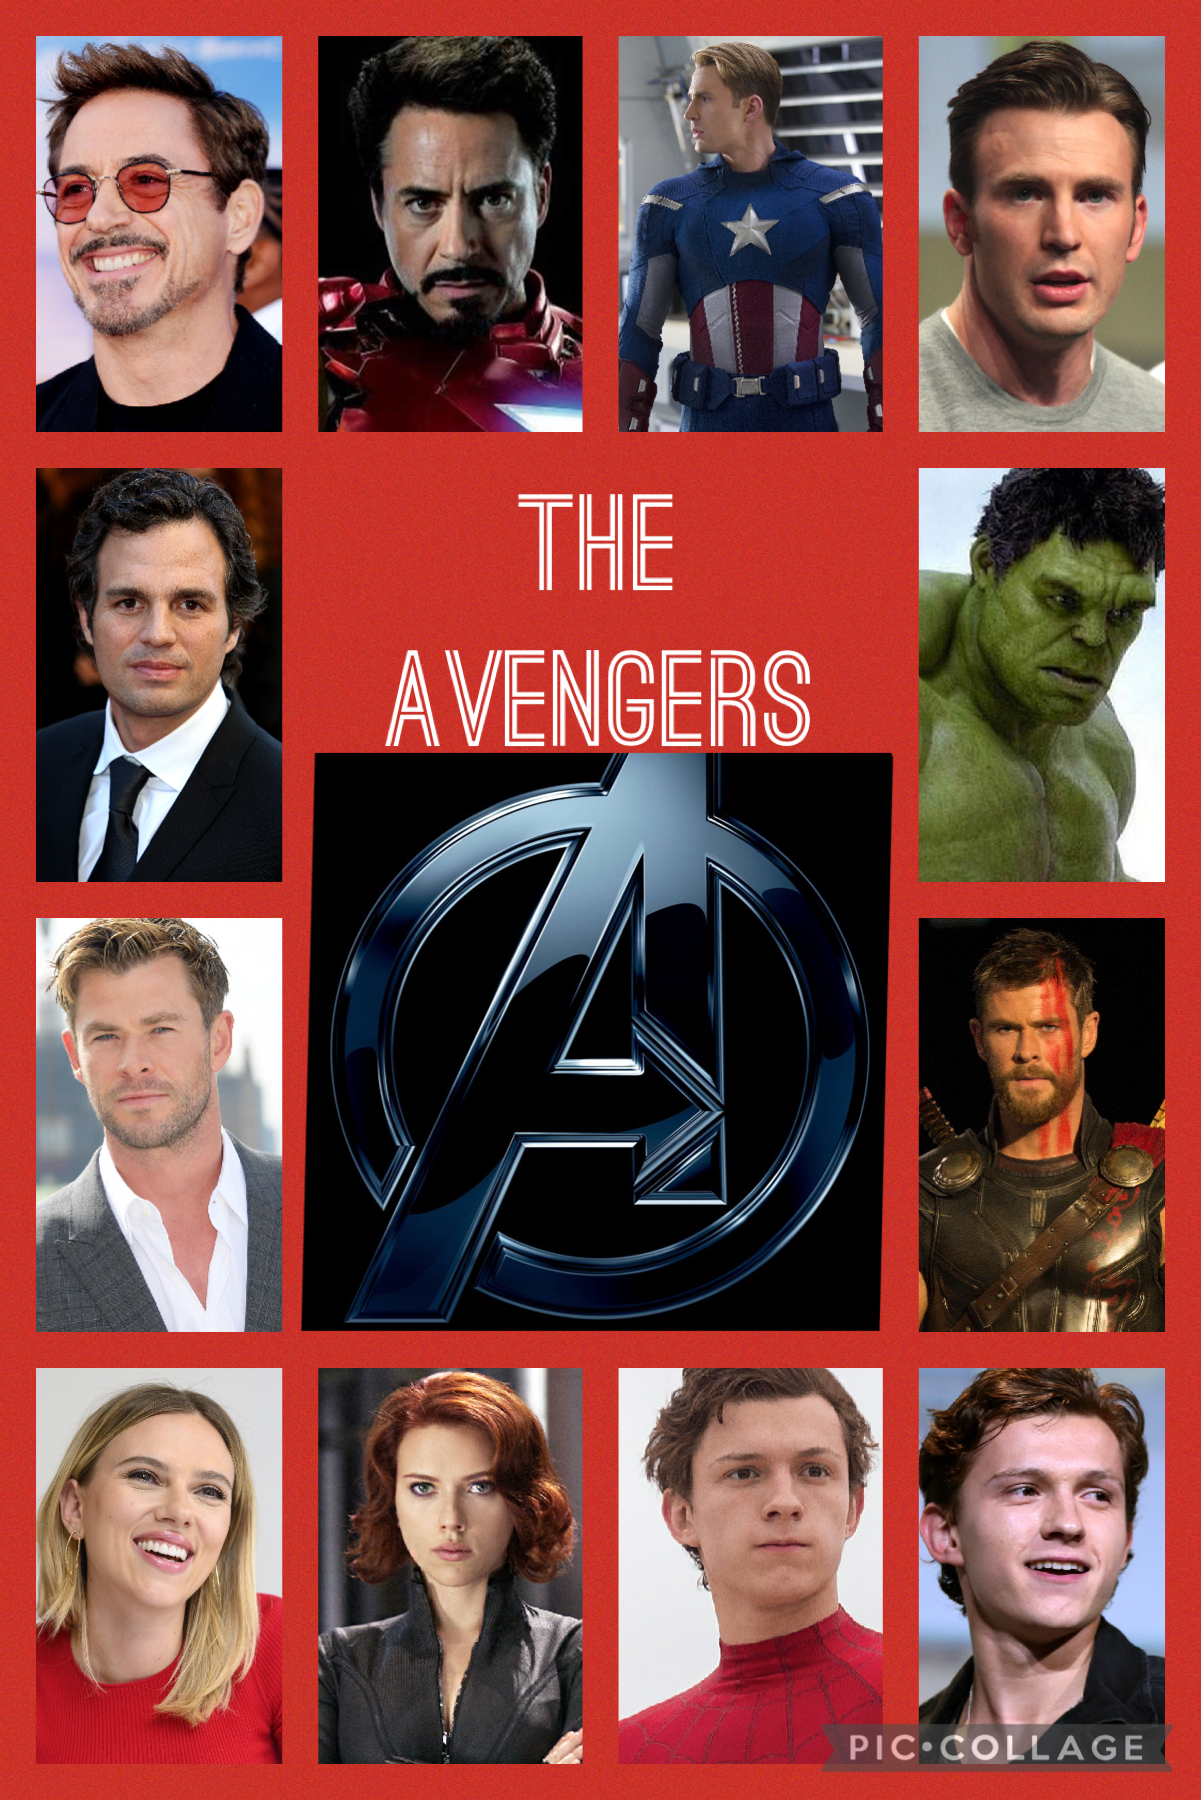 #most of the OG’s 
Well expect Tom Holland but he has to be in it